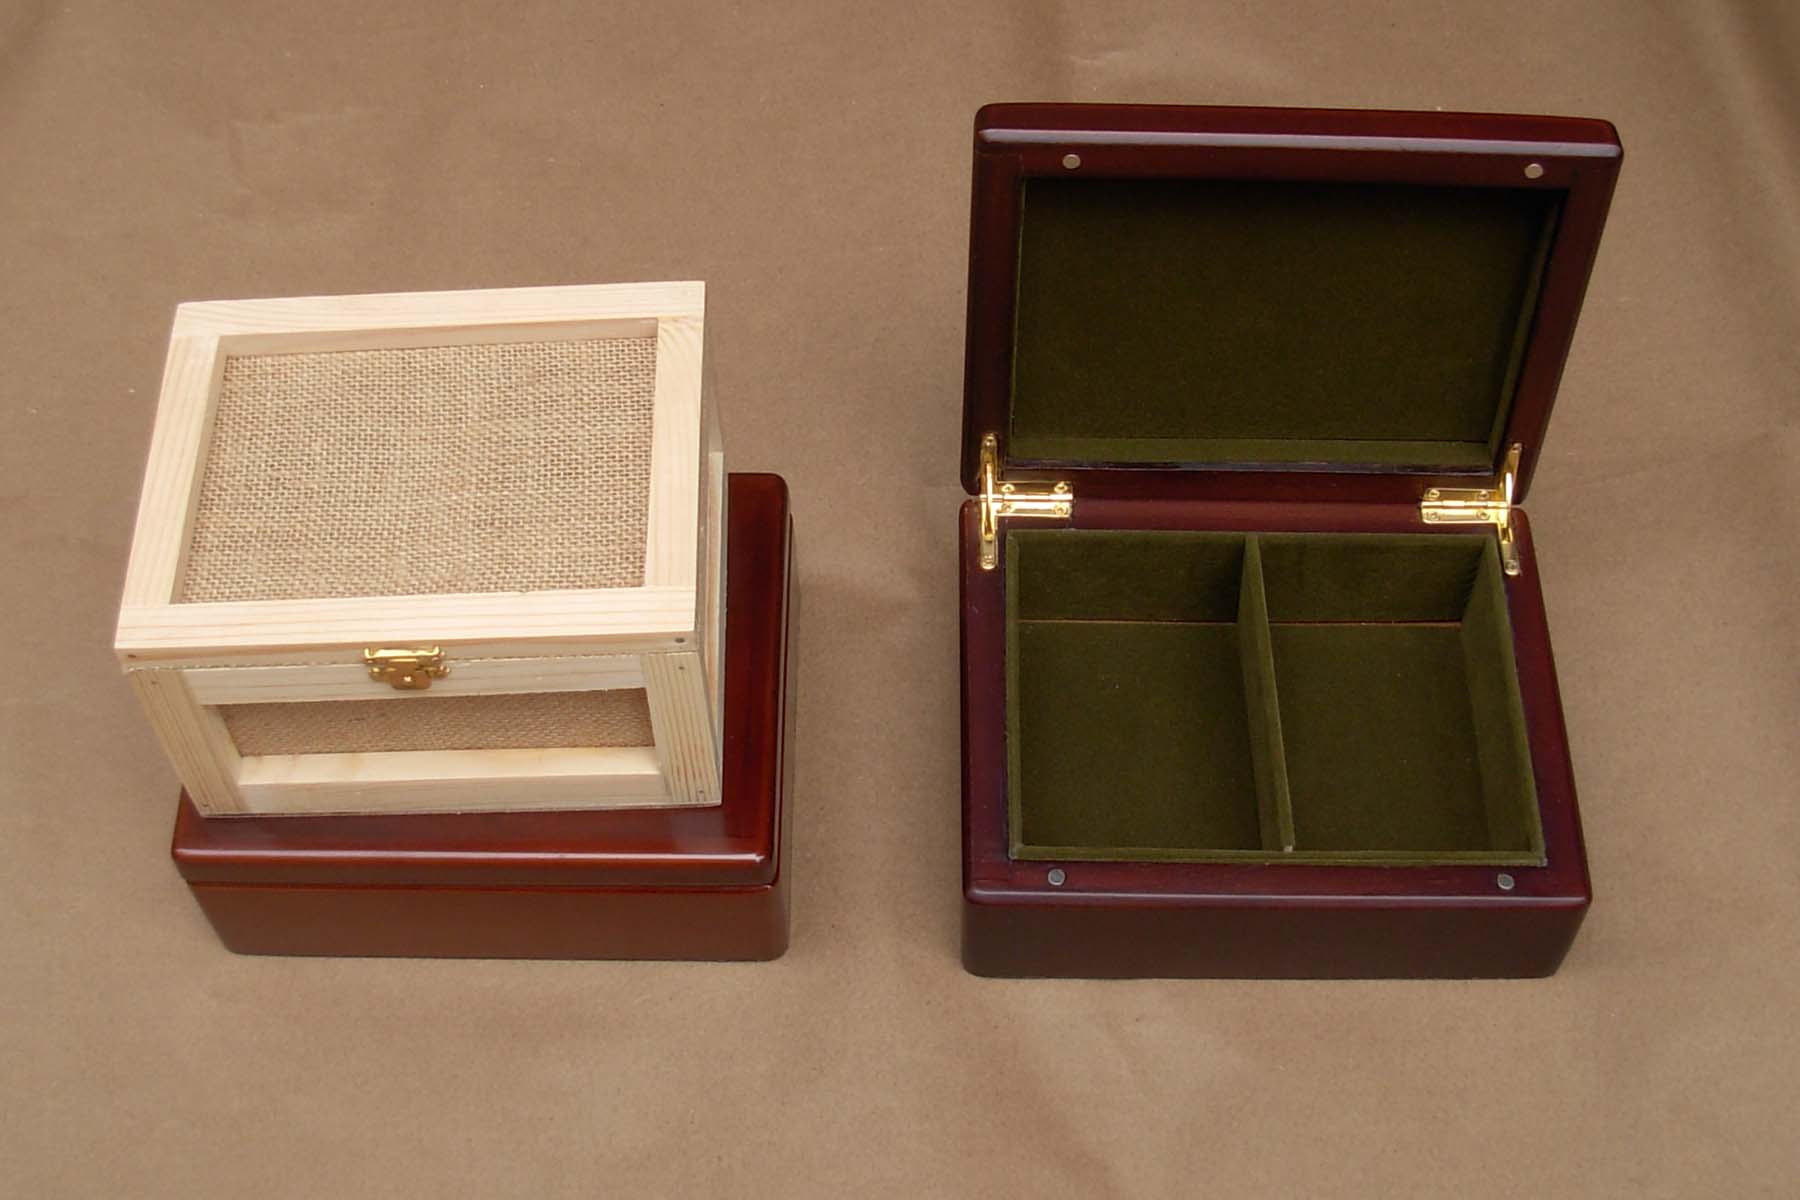 Wooden Jewelry and Gift Box